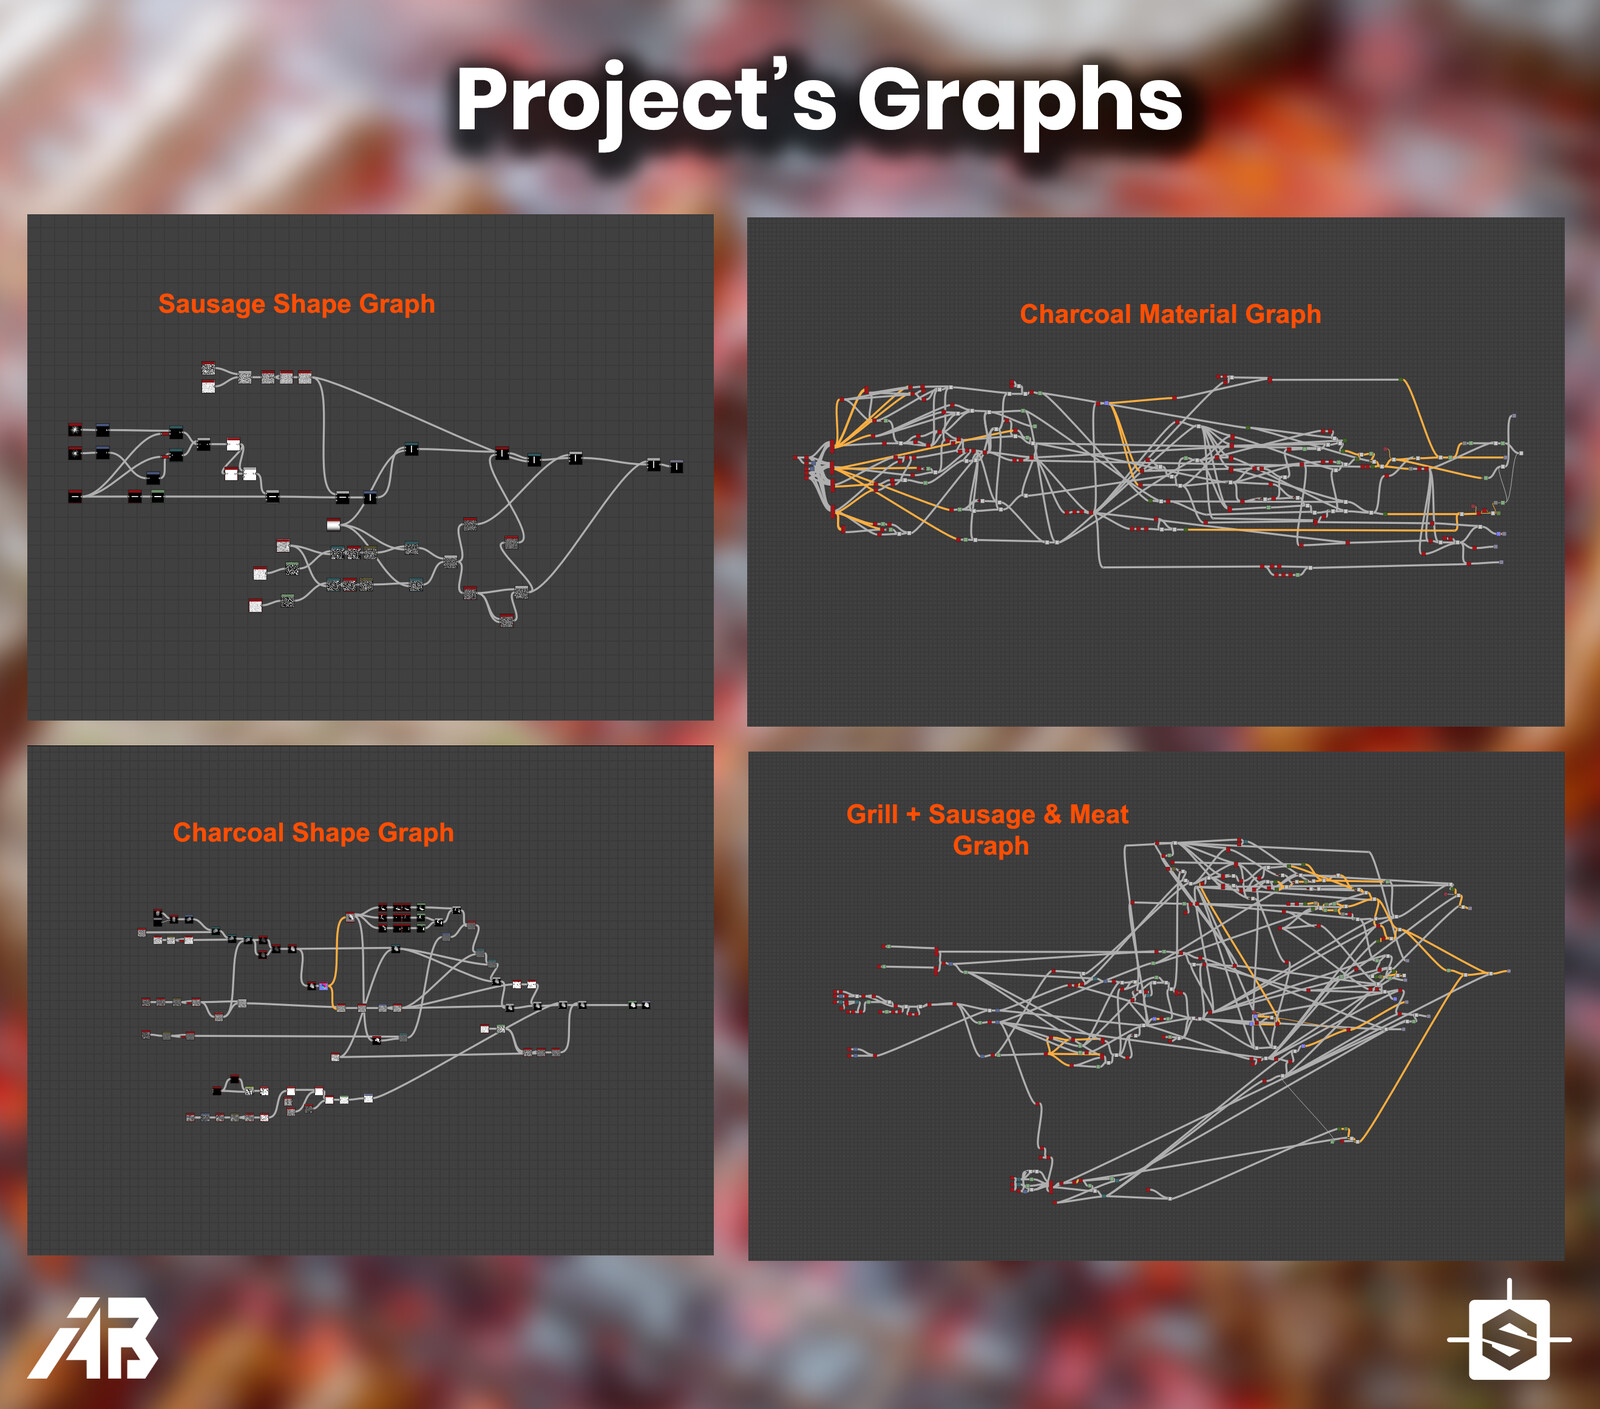 Graphs which I created in this project